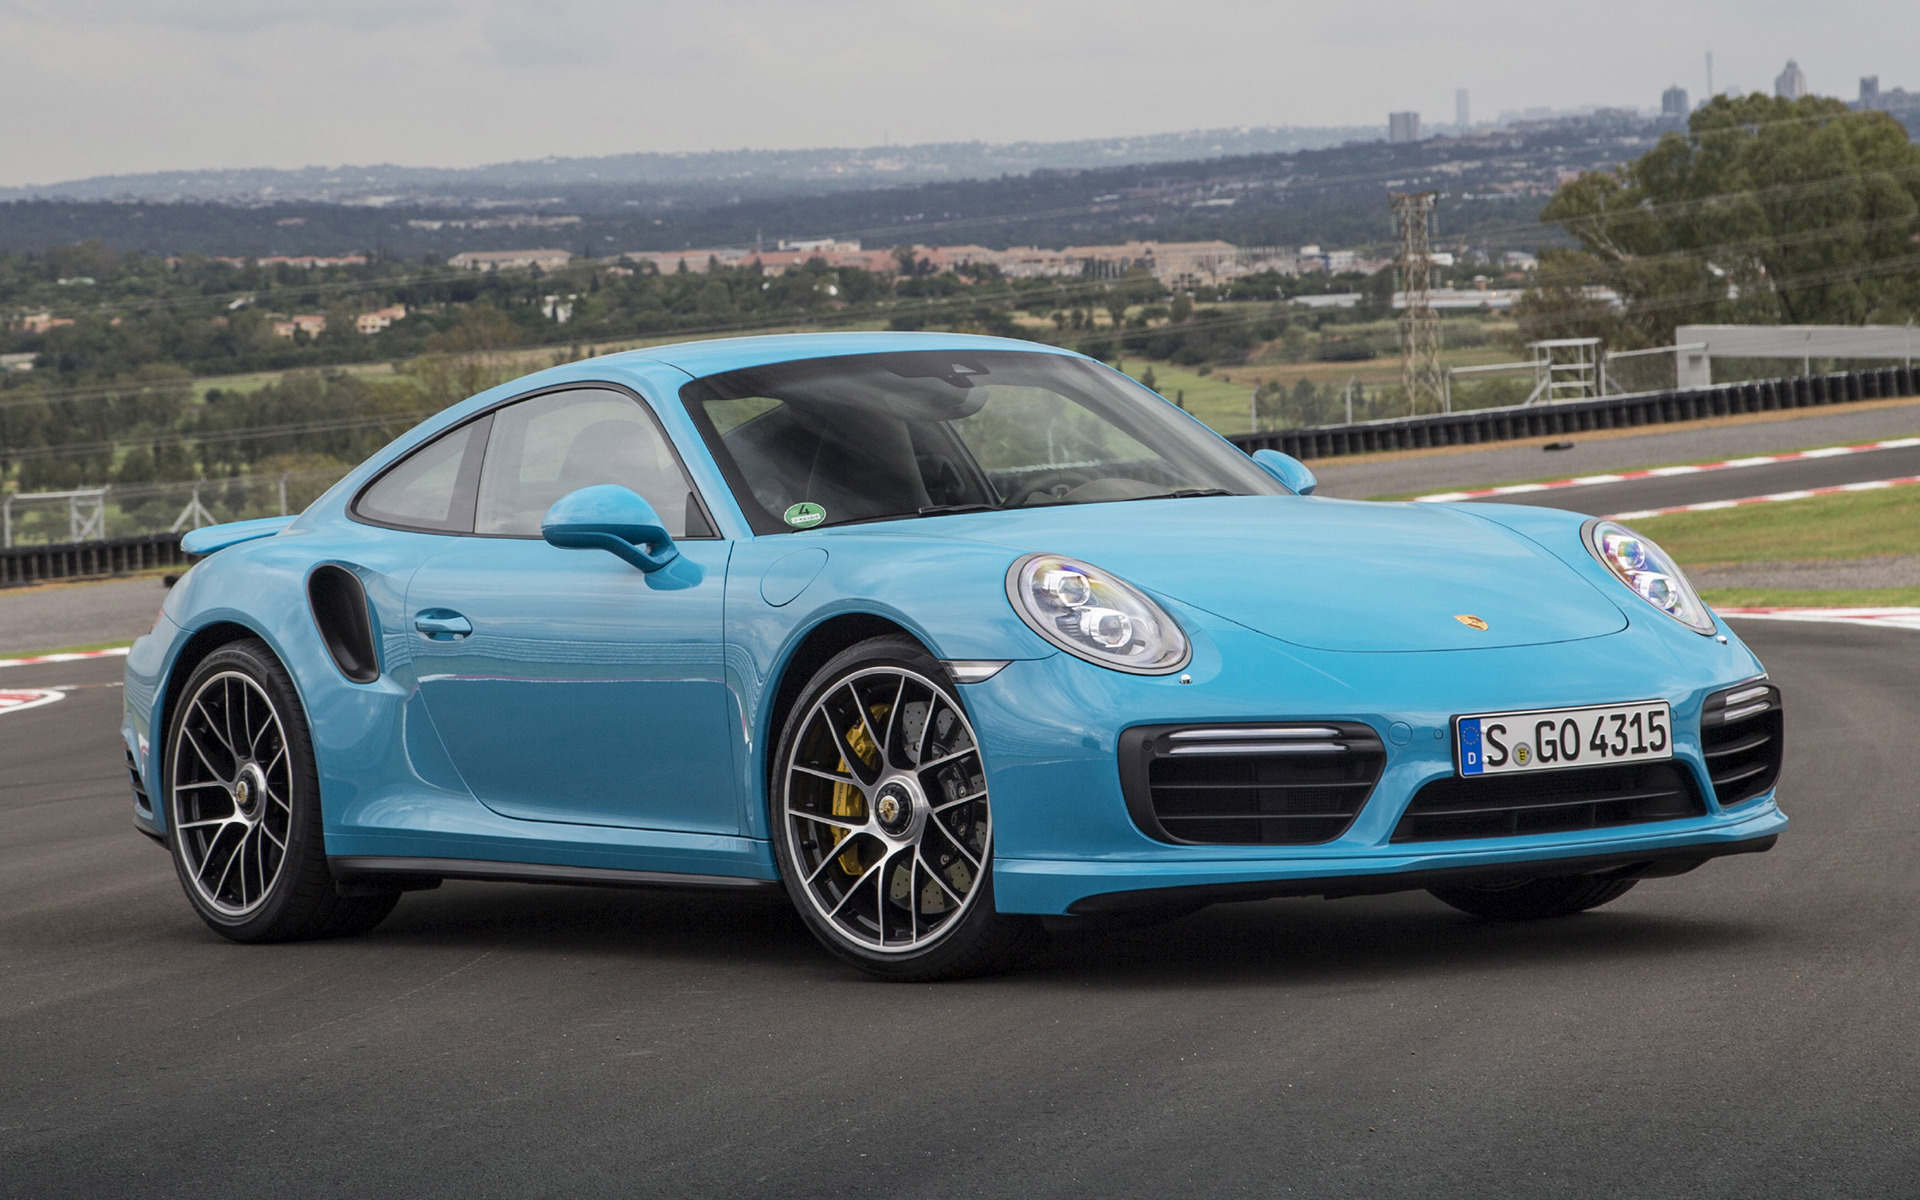 2016 Porsche 911 Turbo S Wallpapers And Hd Images Car Pixel